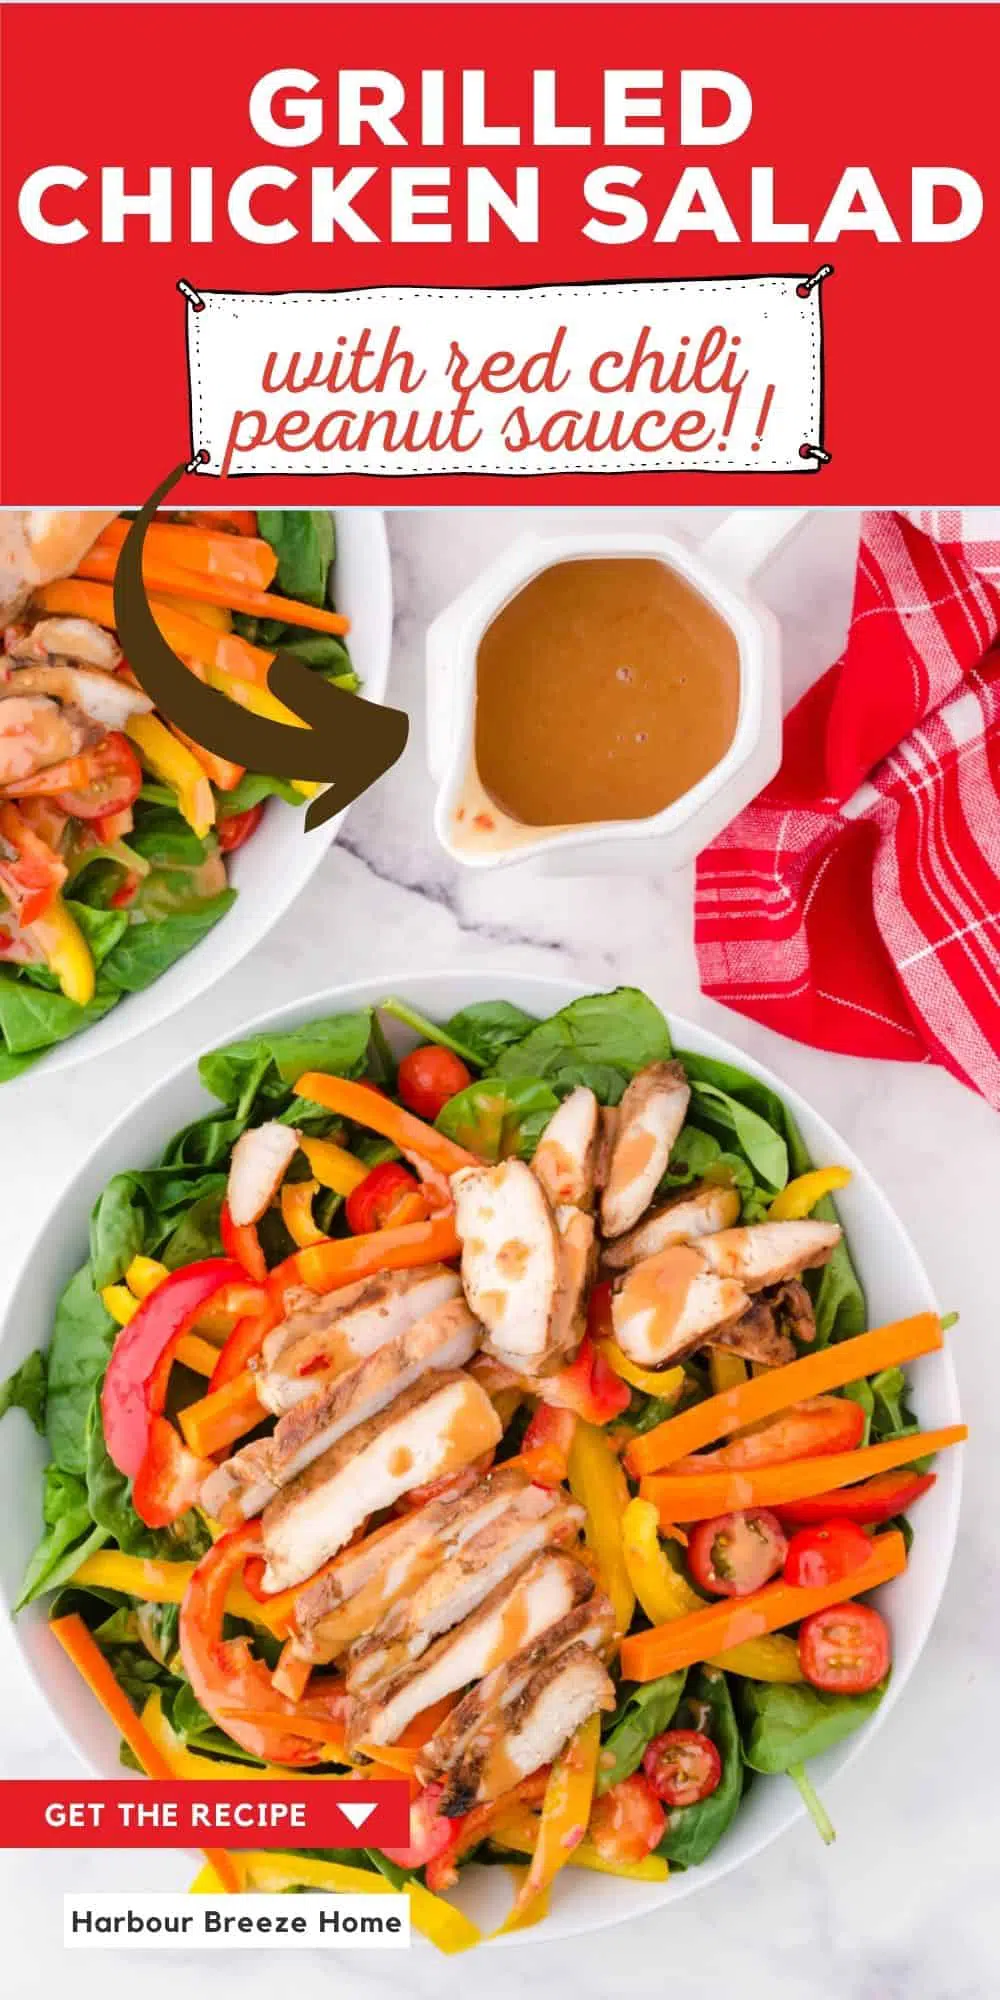 Grilled Chicken Salad with red chili peanut sauce